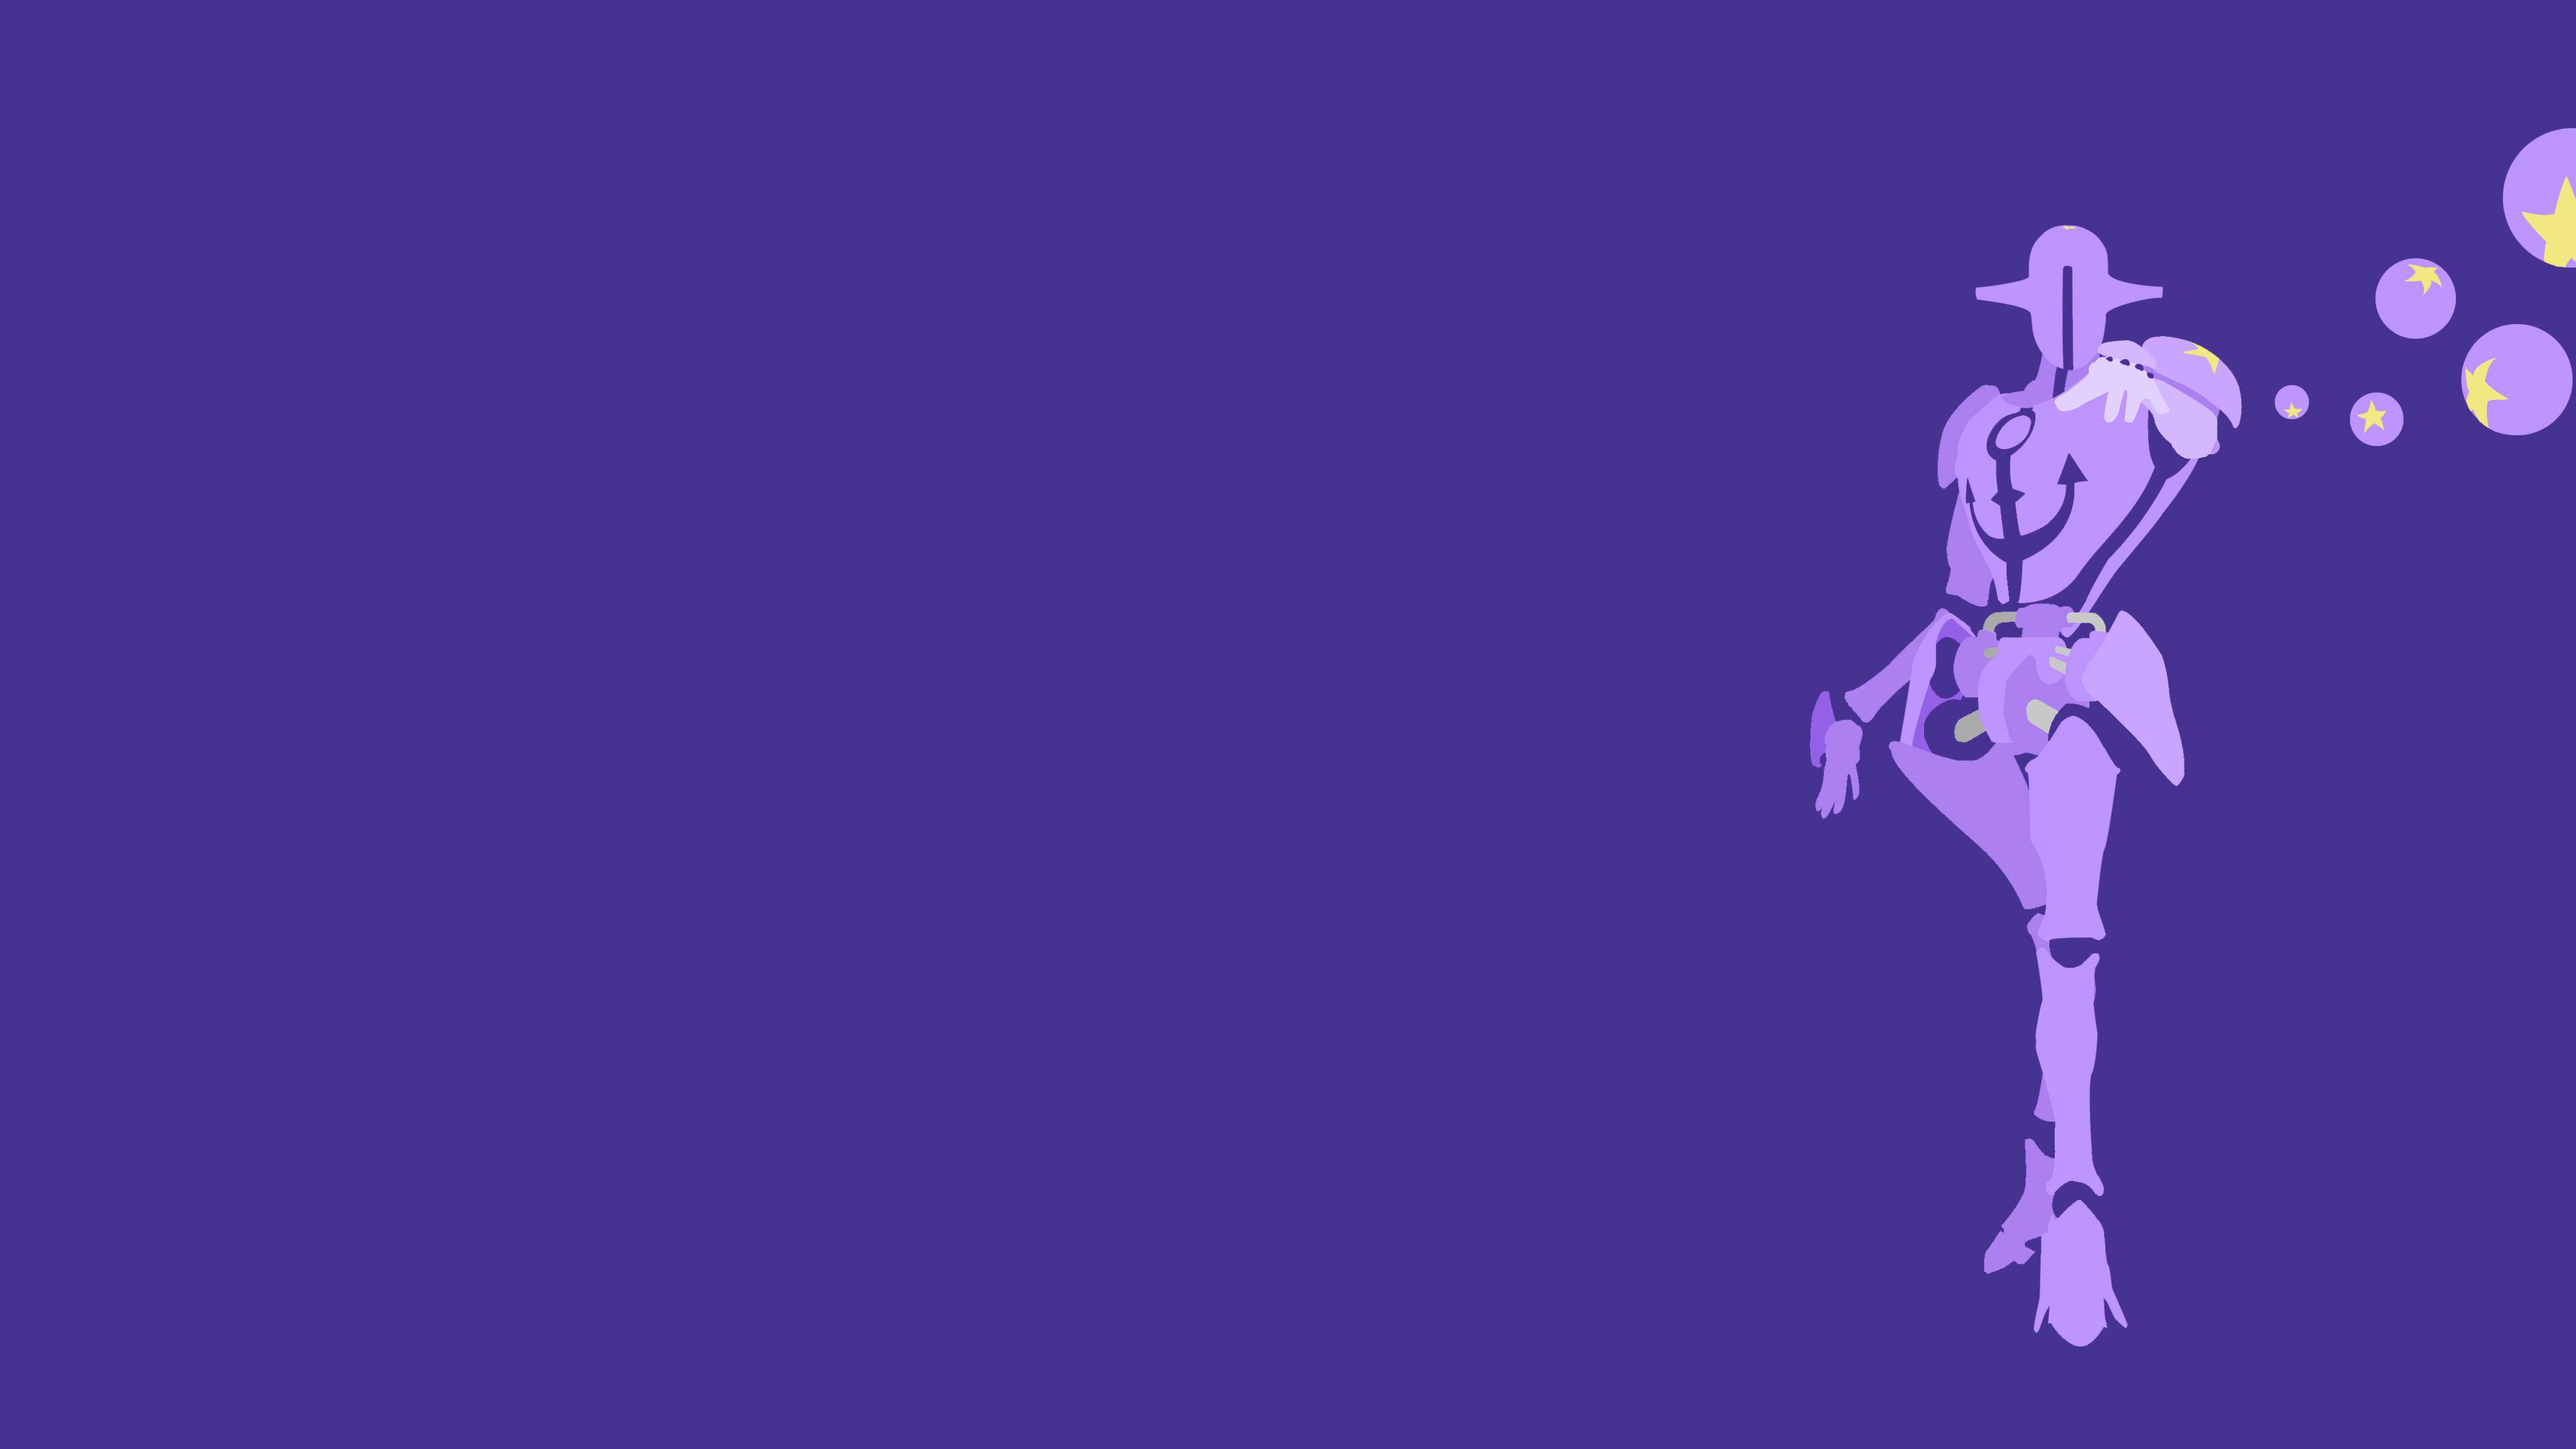 Fanart Made this minimalist Soft & Wet wallpaper since I couldn't find one :^)